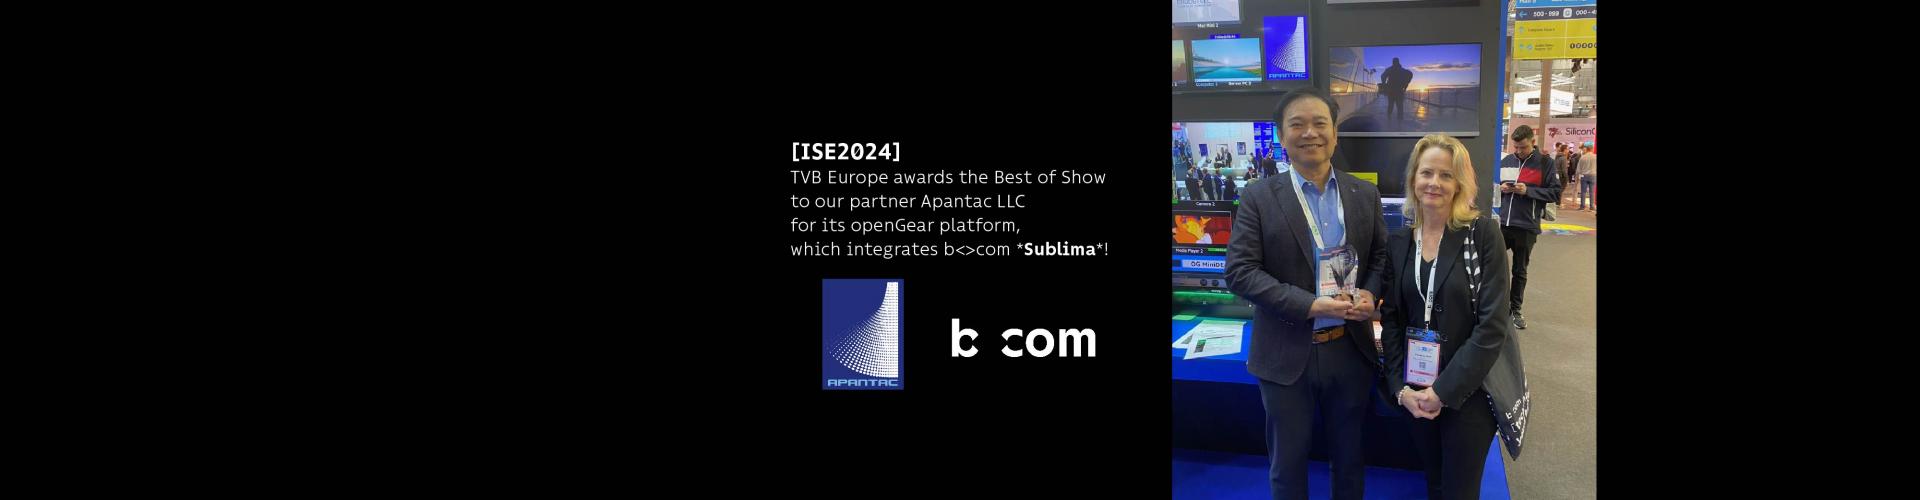 ISE 2024 best of show